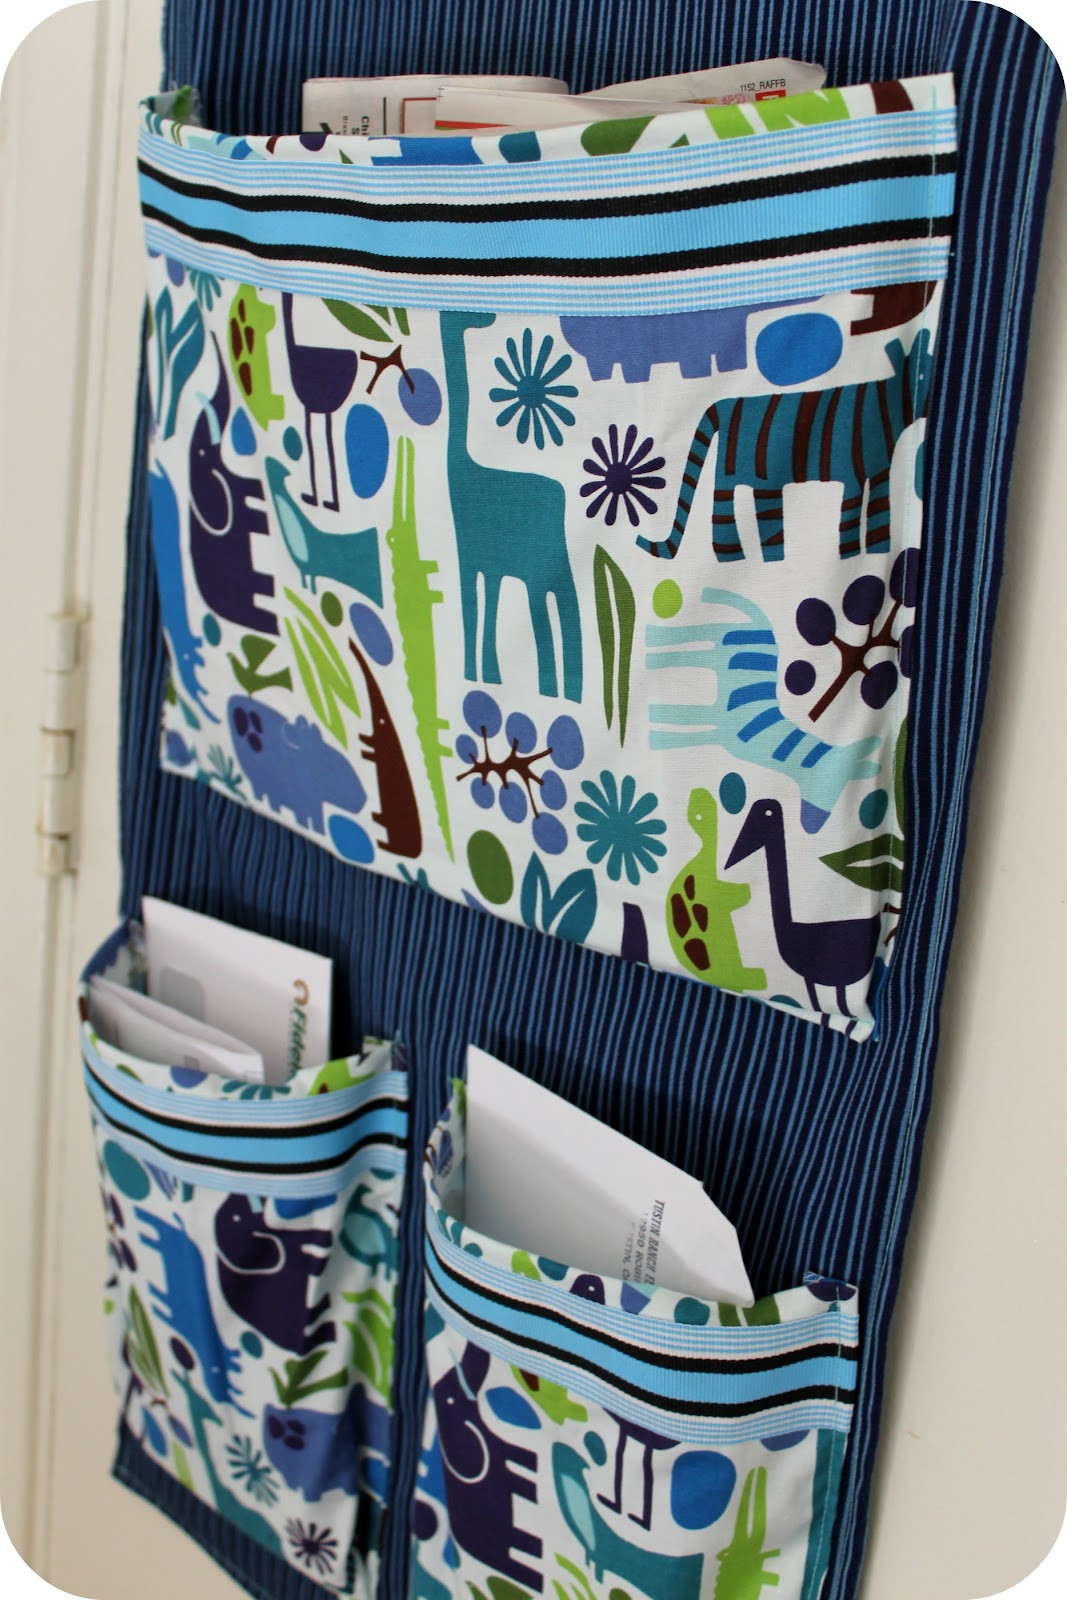 Mail Organizer DIY
 DiY Project Sew a Fabric Mail Organizer for the Wall